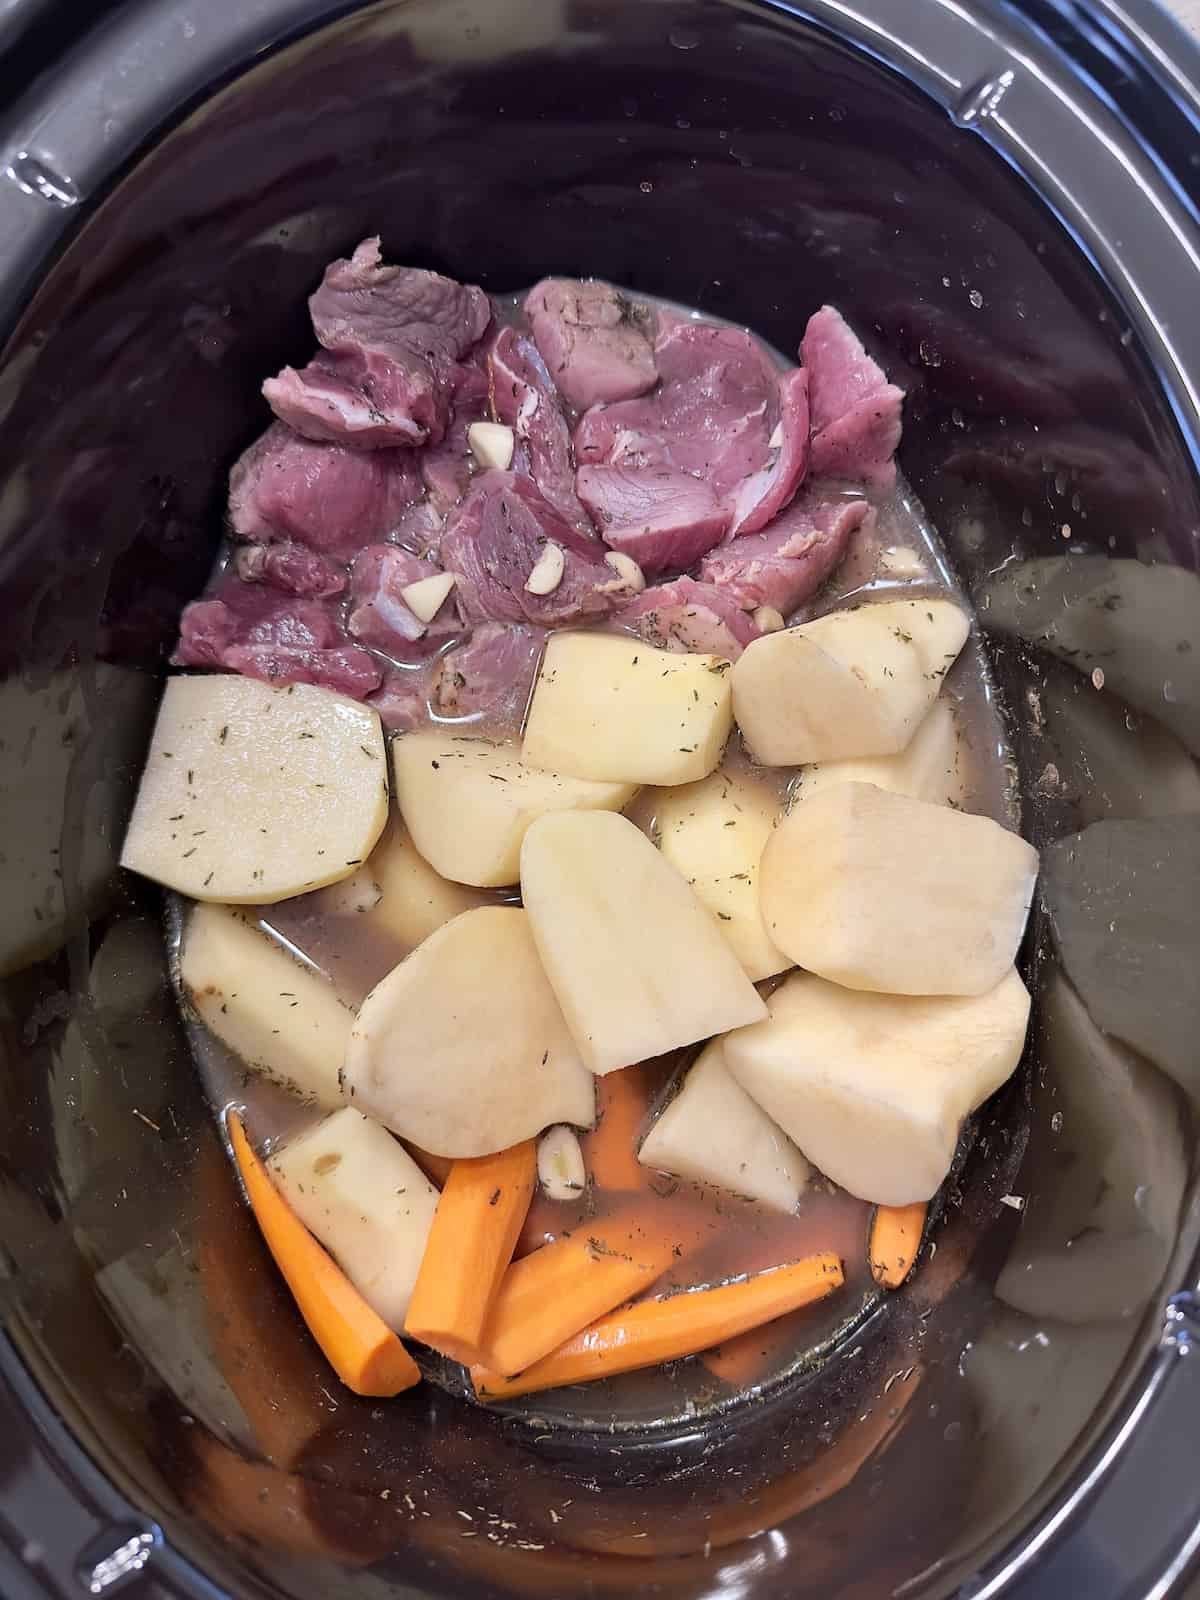 cut leg of lamb, carrots, potatoes, broth and spices in the slow cooker uncooked